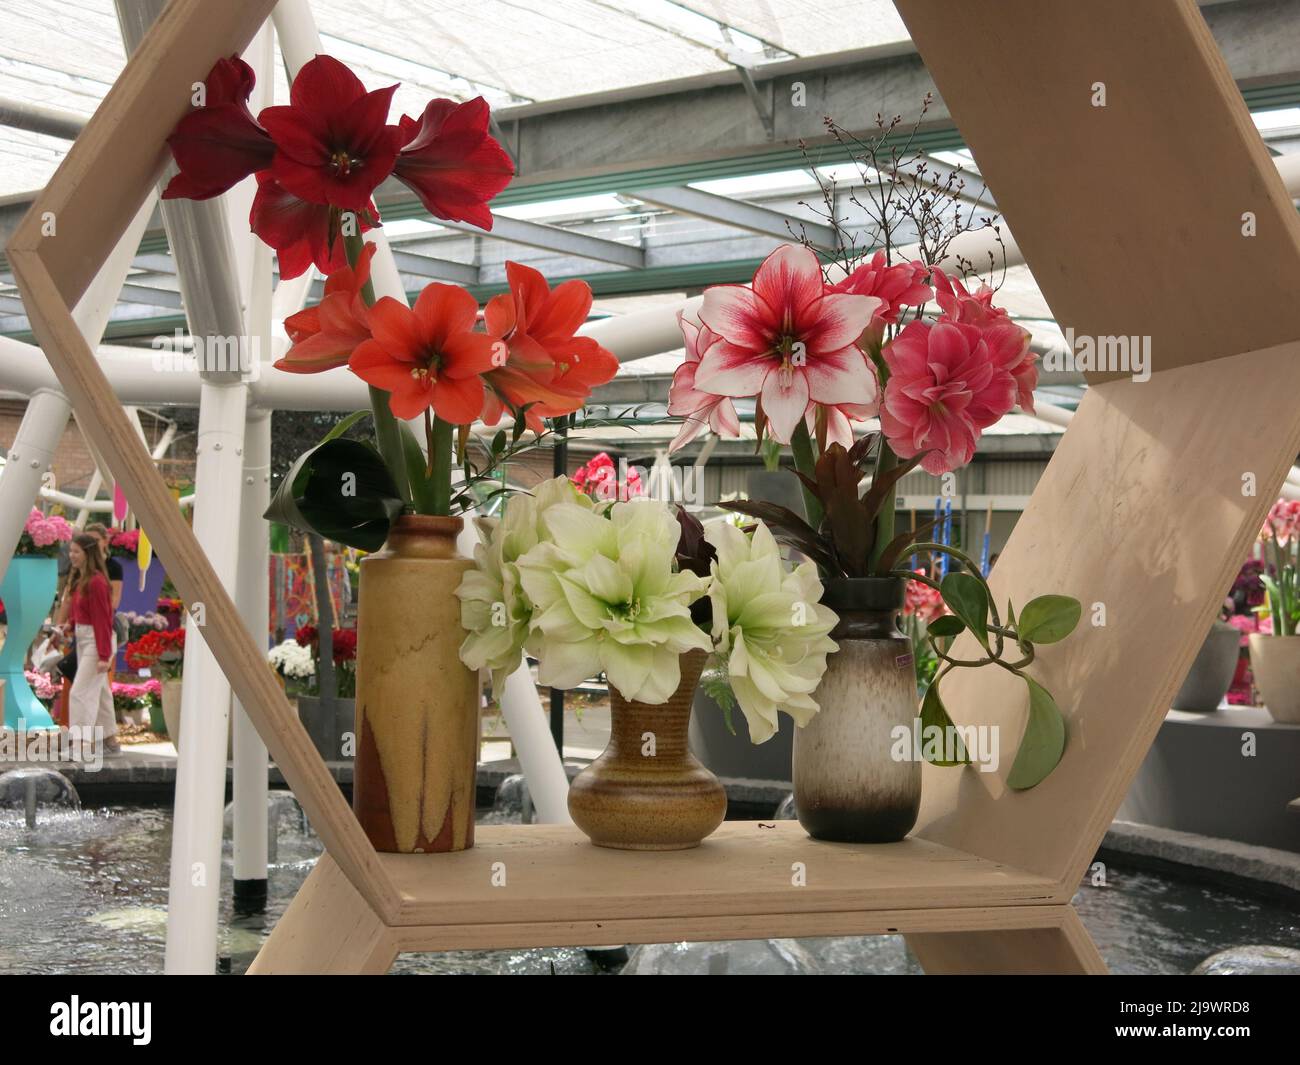 The flower arrangements and floral displays are works of art & creativity in the pavilions at Keukenhof 2022; ideas for home decor & interior design. Stock Photo